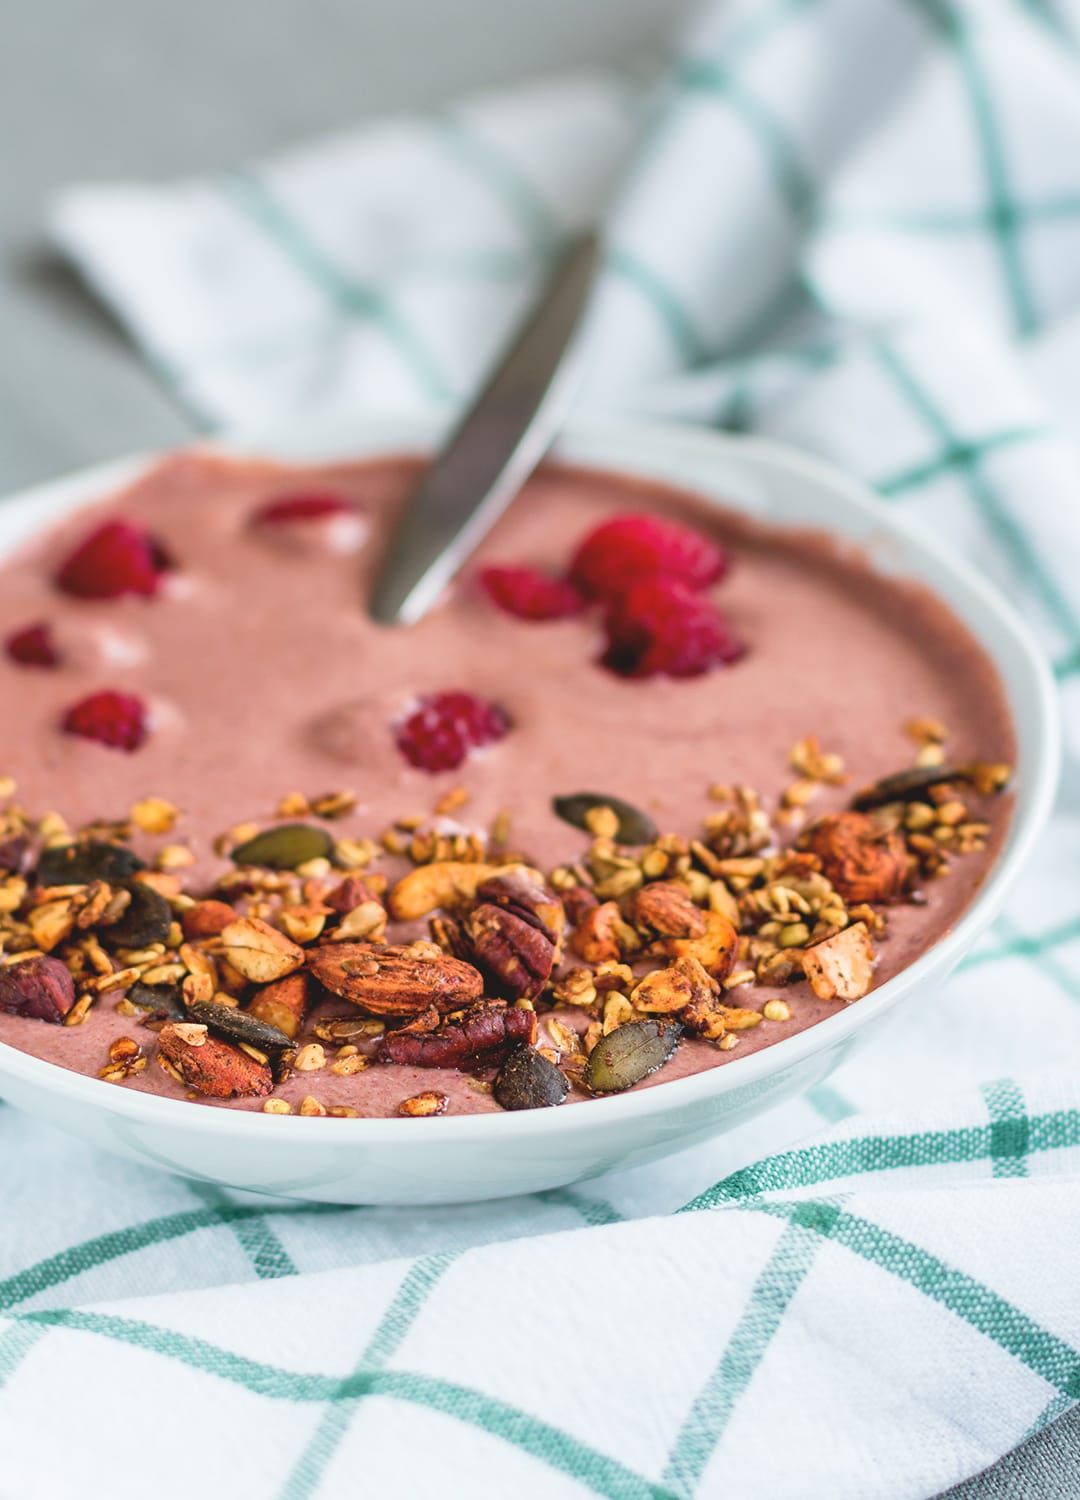 Raw Sour Cherry Chocolate Buckwheat Porridge - delicious chocolatey raw porridge full of vitamins and minerals. I love this recipes, it's my favorite this spring! Creamy, satysfying, fruity, and so good for you! | thehealthfulideas.com